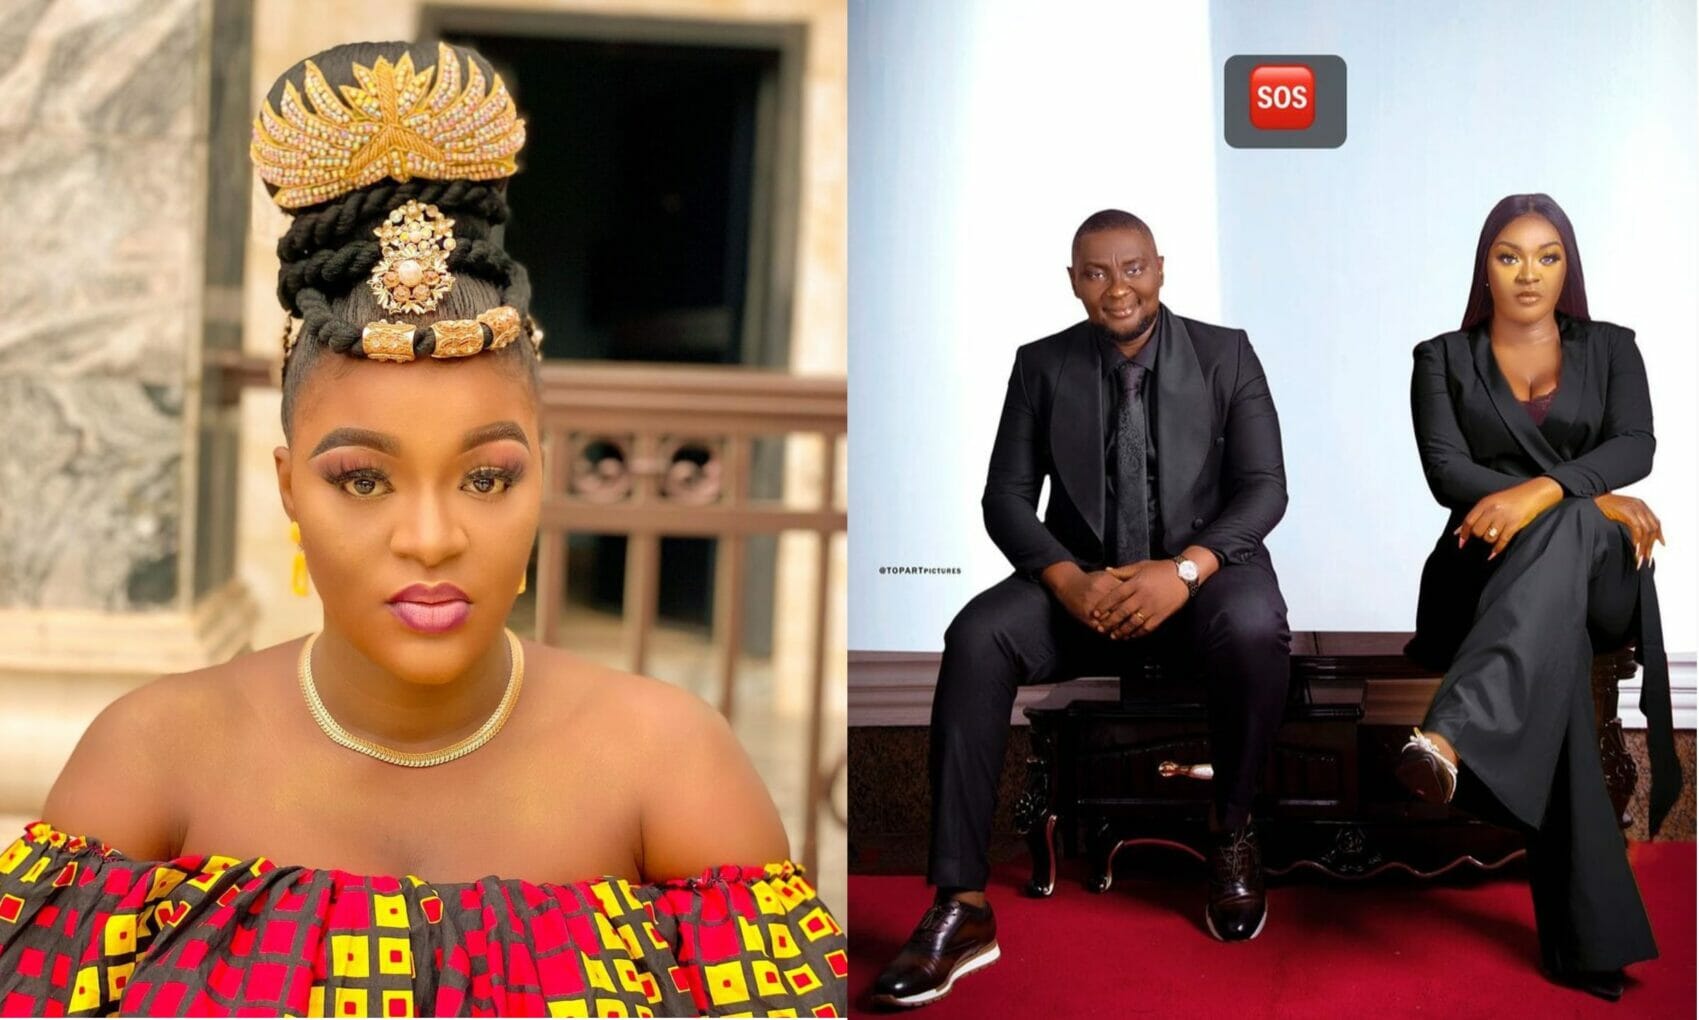 Chacha Eke Faani issues an SOS moments after she announced her separation from her husband